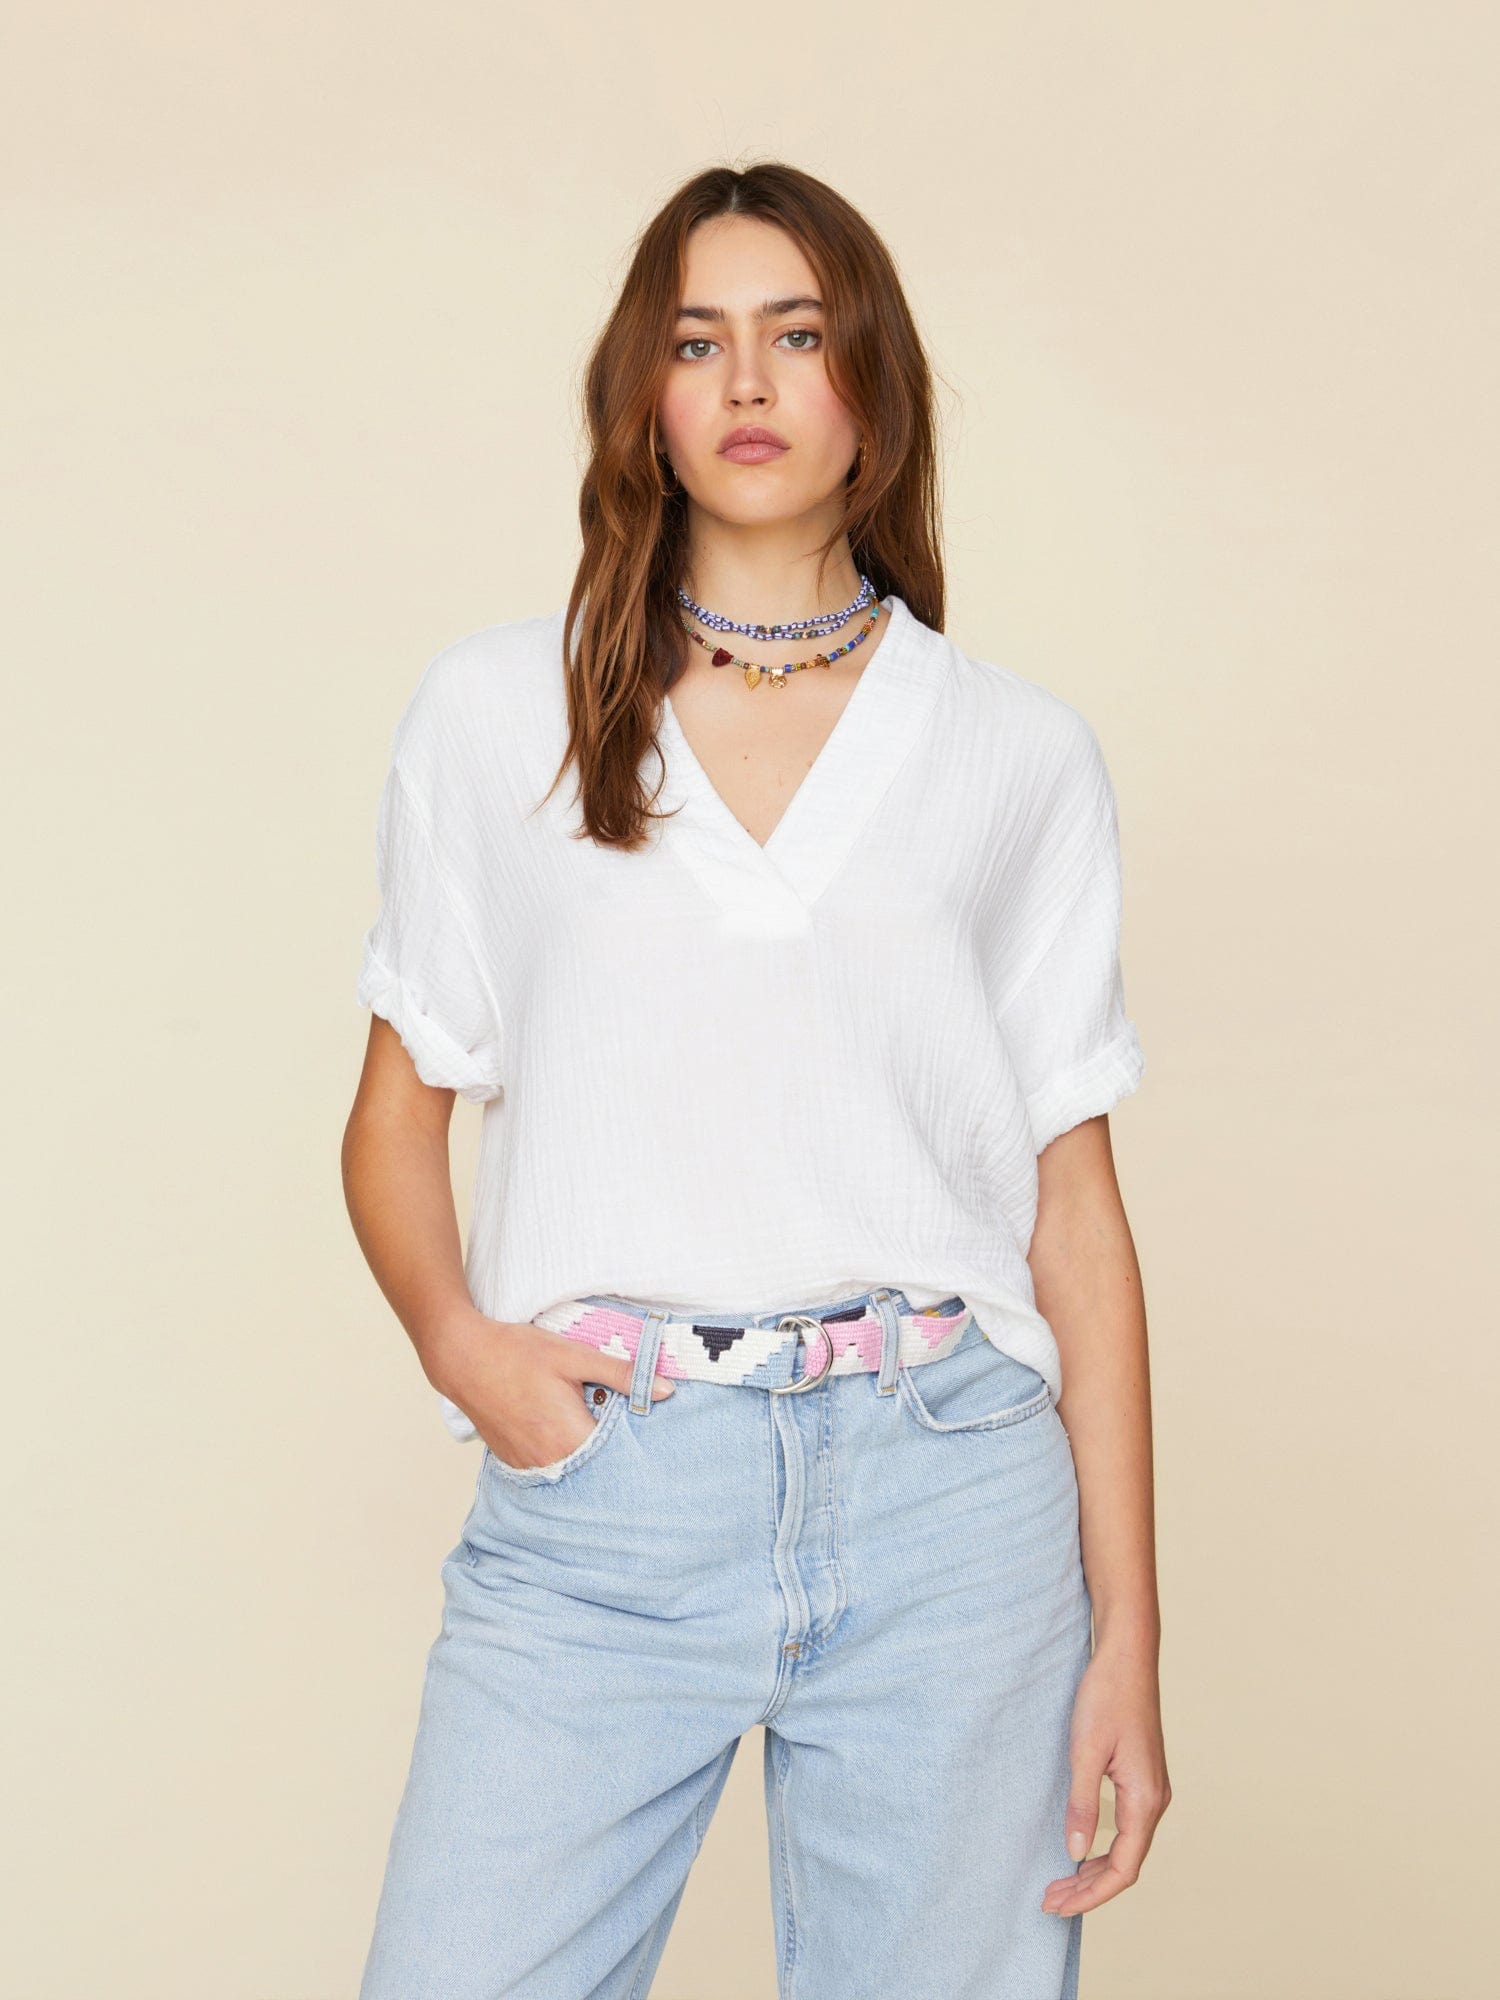 11 Fluttery Summer Tops With Sleeves Under $100 - Chatelaine